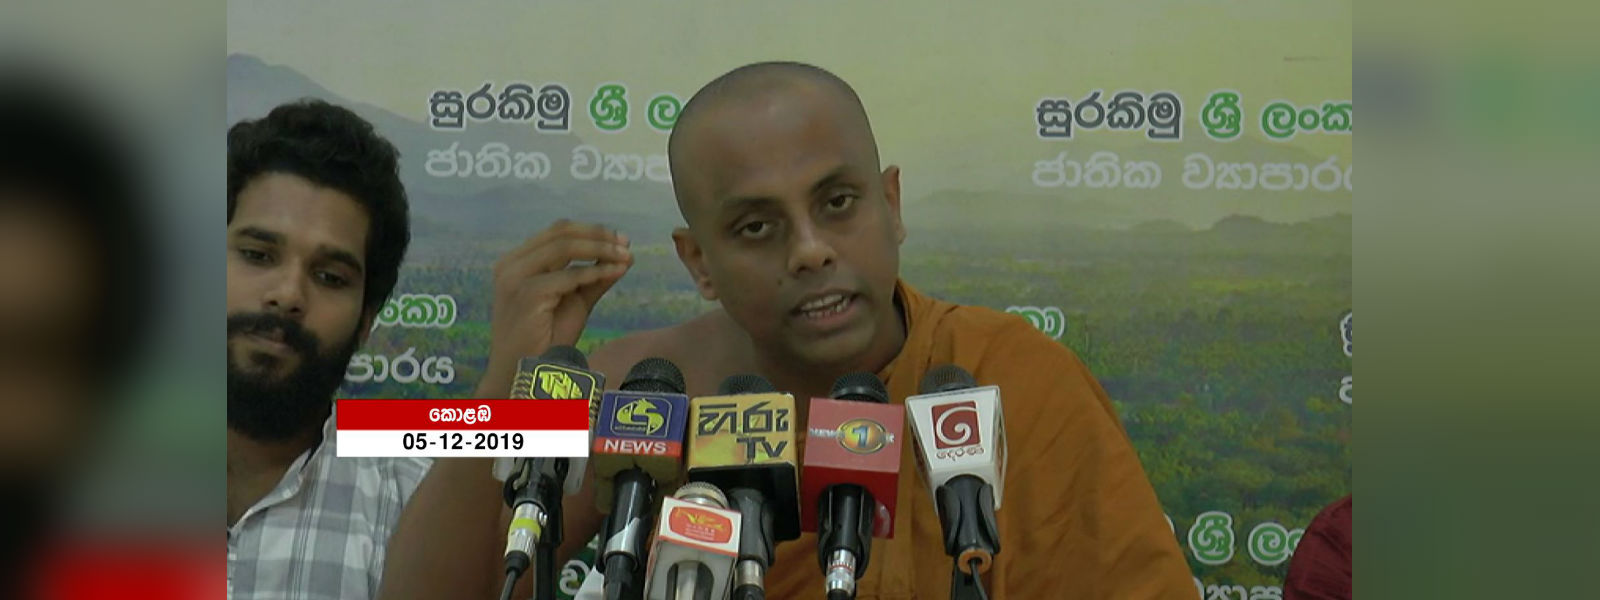 Ranil Wickremesinghe is an MP now, he could be arrested for the bond scam: Ven. Pahiyangala Ananda Sagara Thero